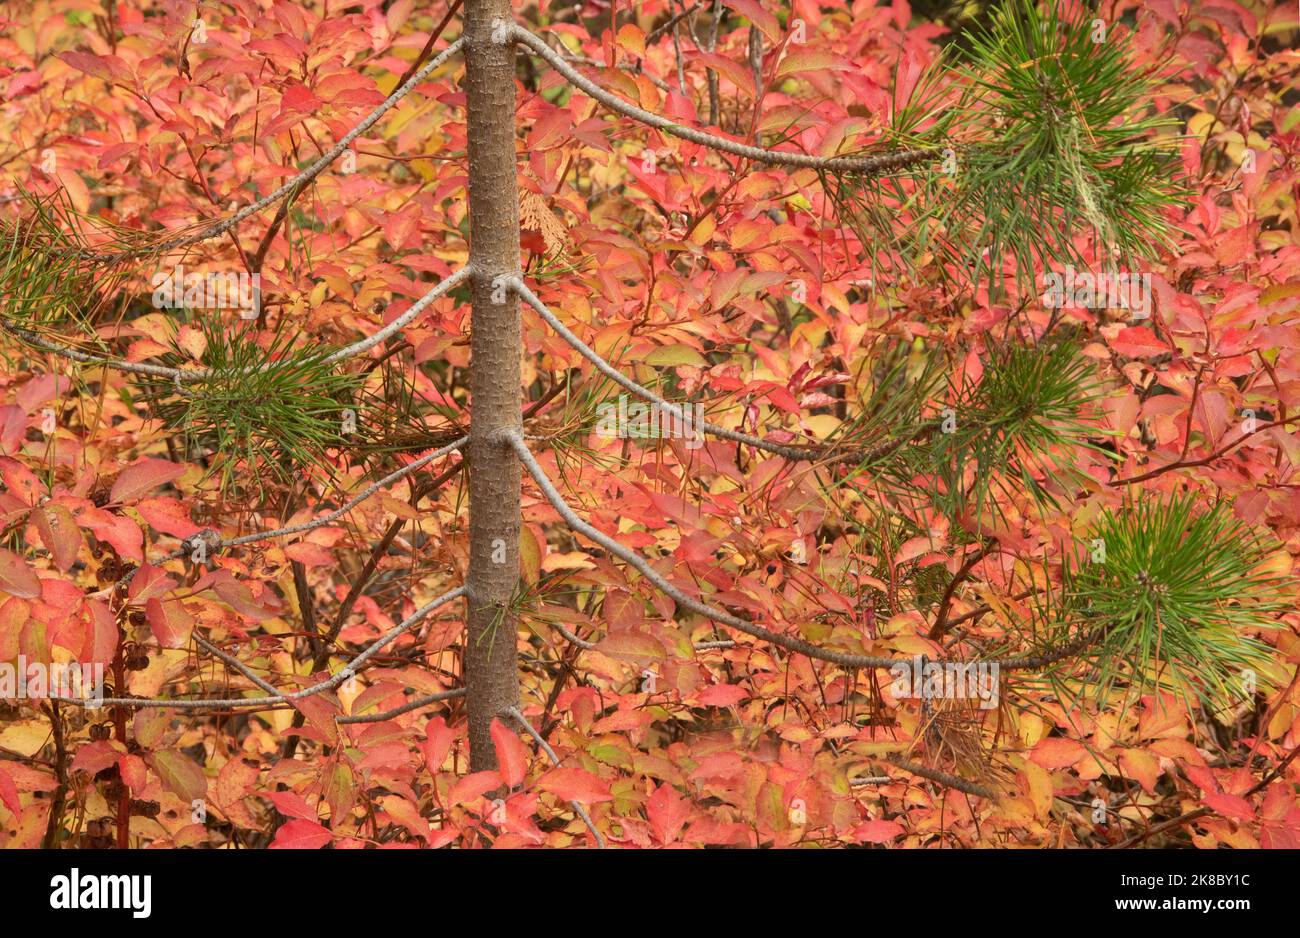 Young pine tree and autumn colors of wild huckleberry shrubs, Mt. Hood, Oregon Stock Photo